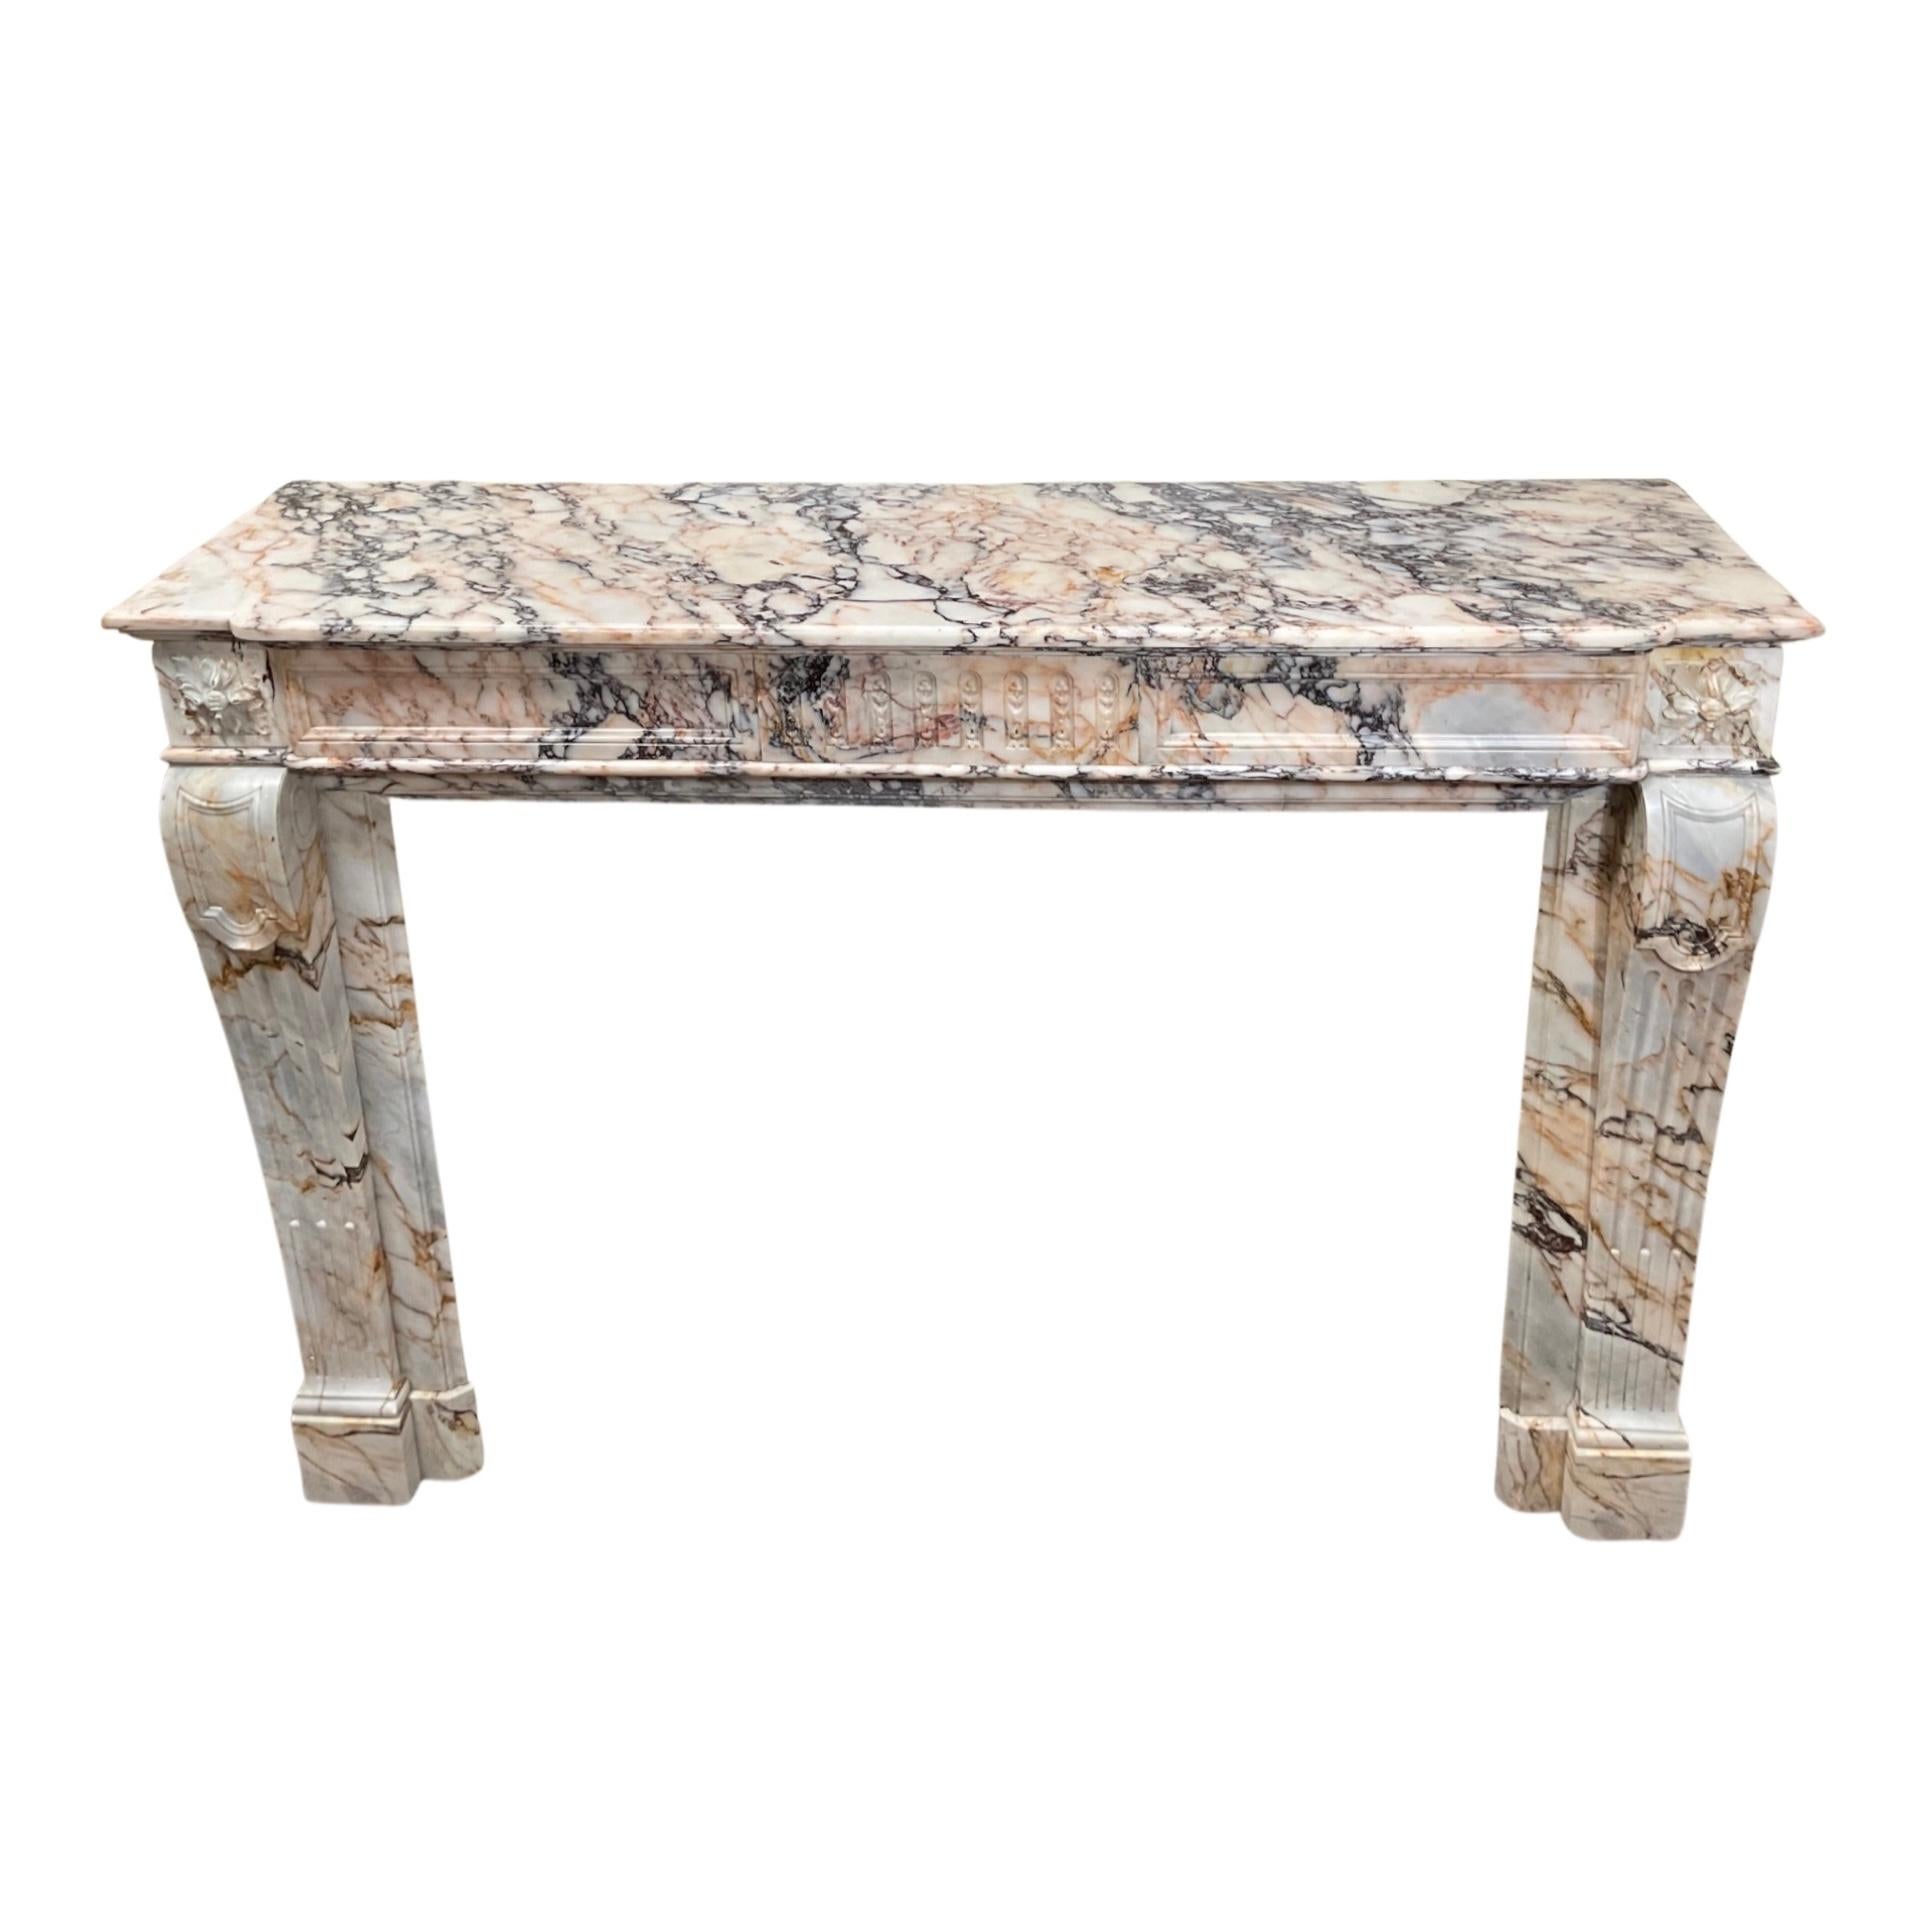 This French Marble Mantel from the 1870s is crafted from Breche marble, giving it an elegant Louis XVI style. Ideal for adding a timeless and sophisticated atmosphere to your home.